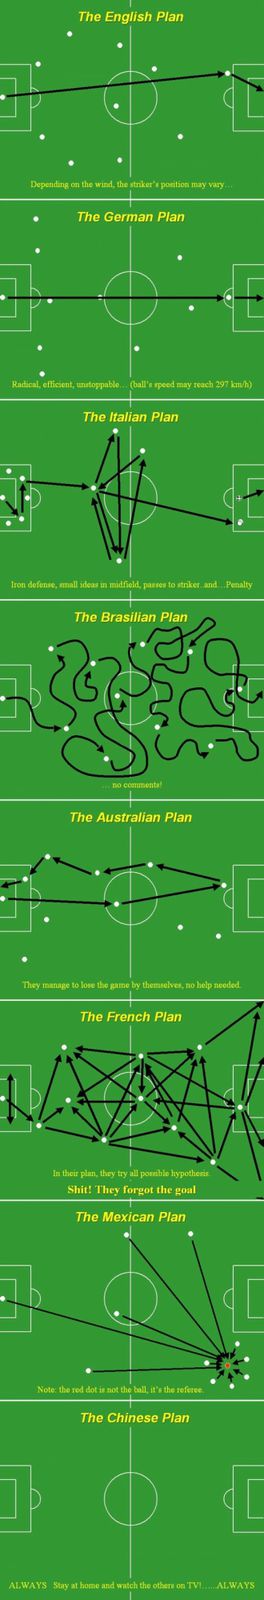 Wold_Cup_Team_Strategys_for_the_World_Cup-s540x326-copie-1.jpg